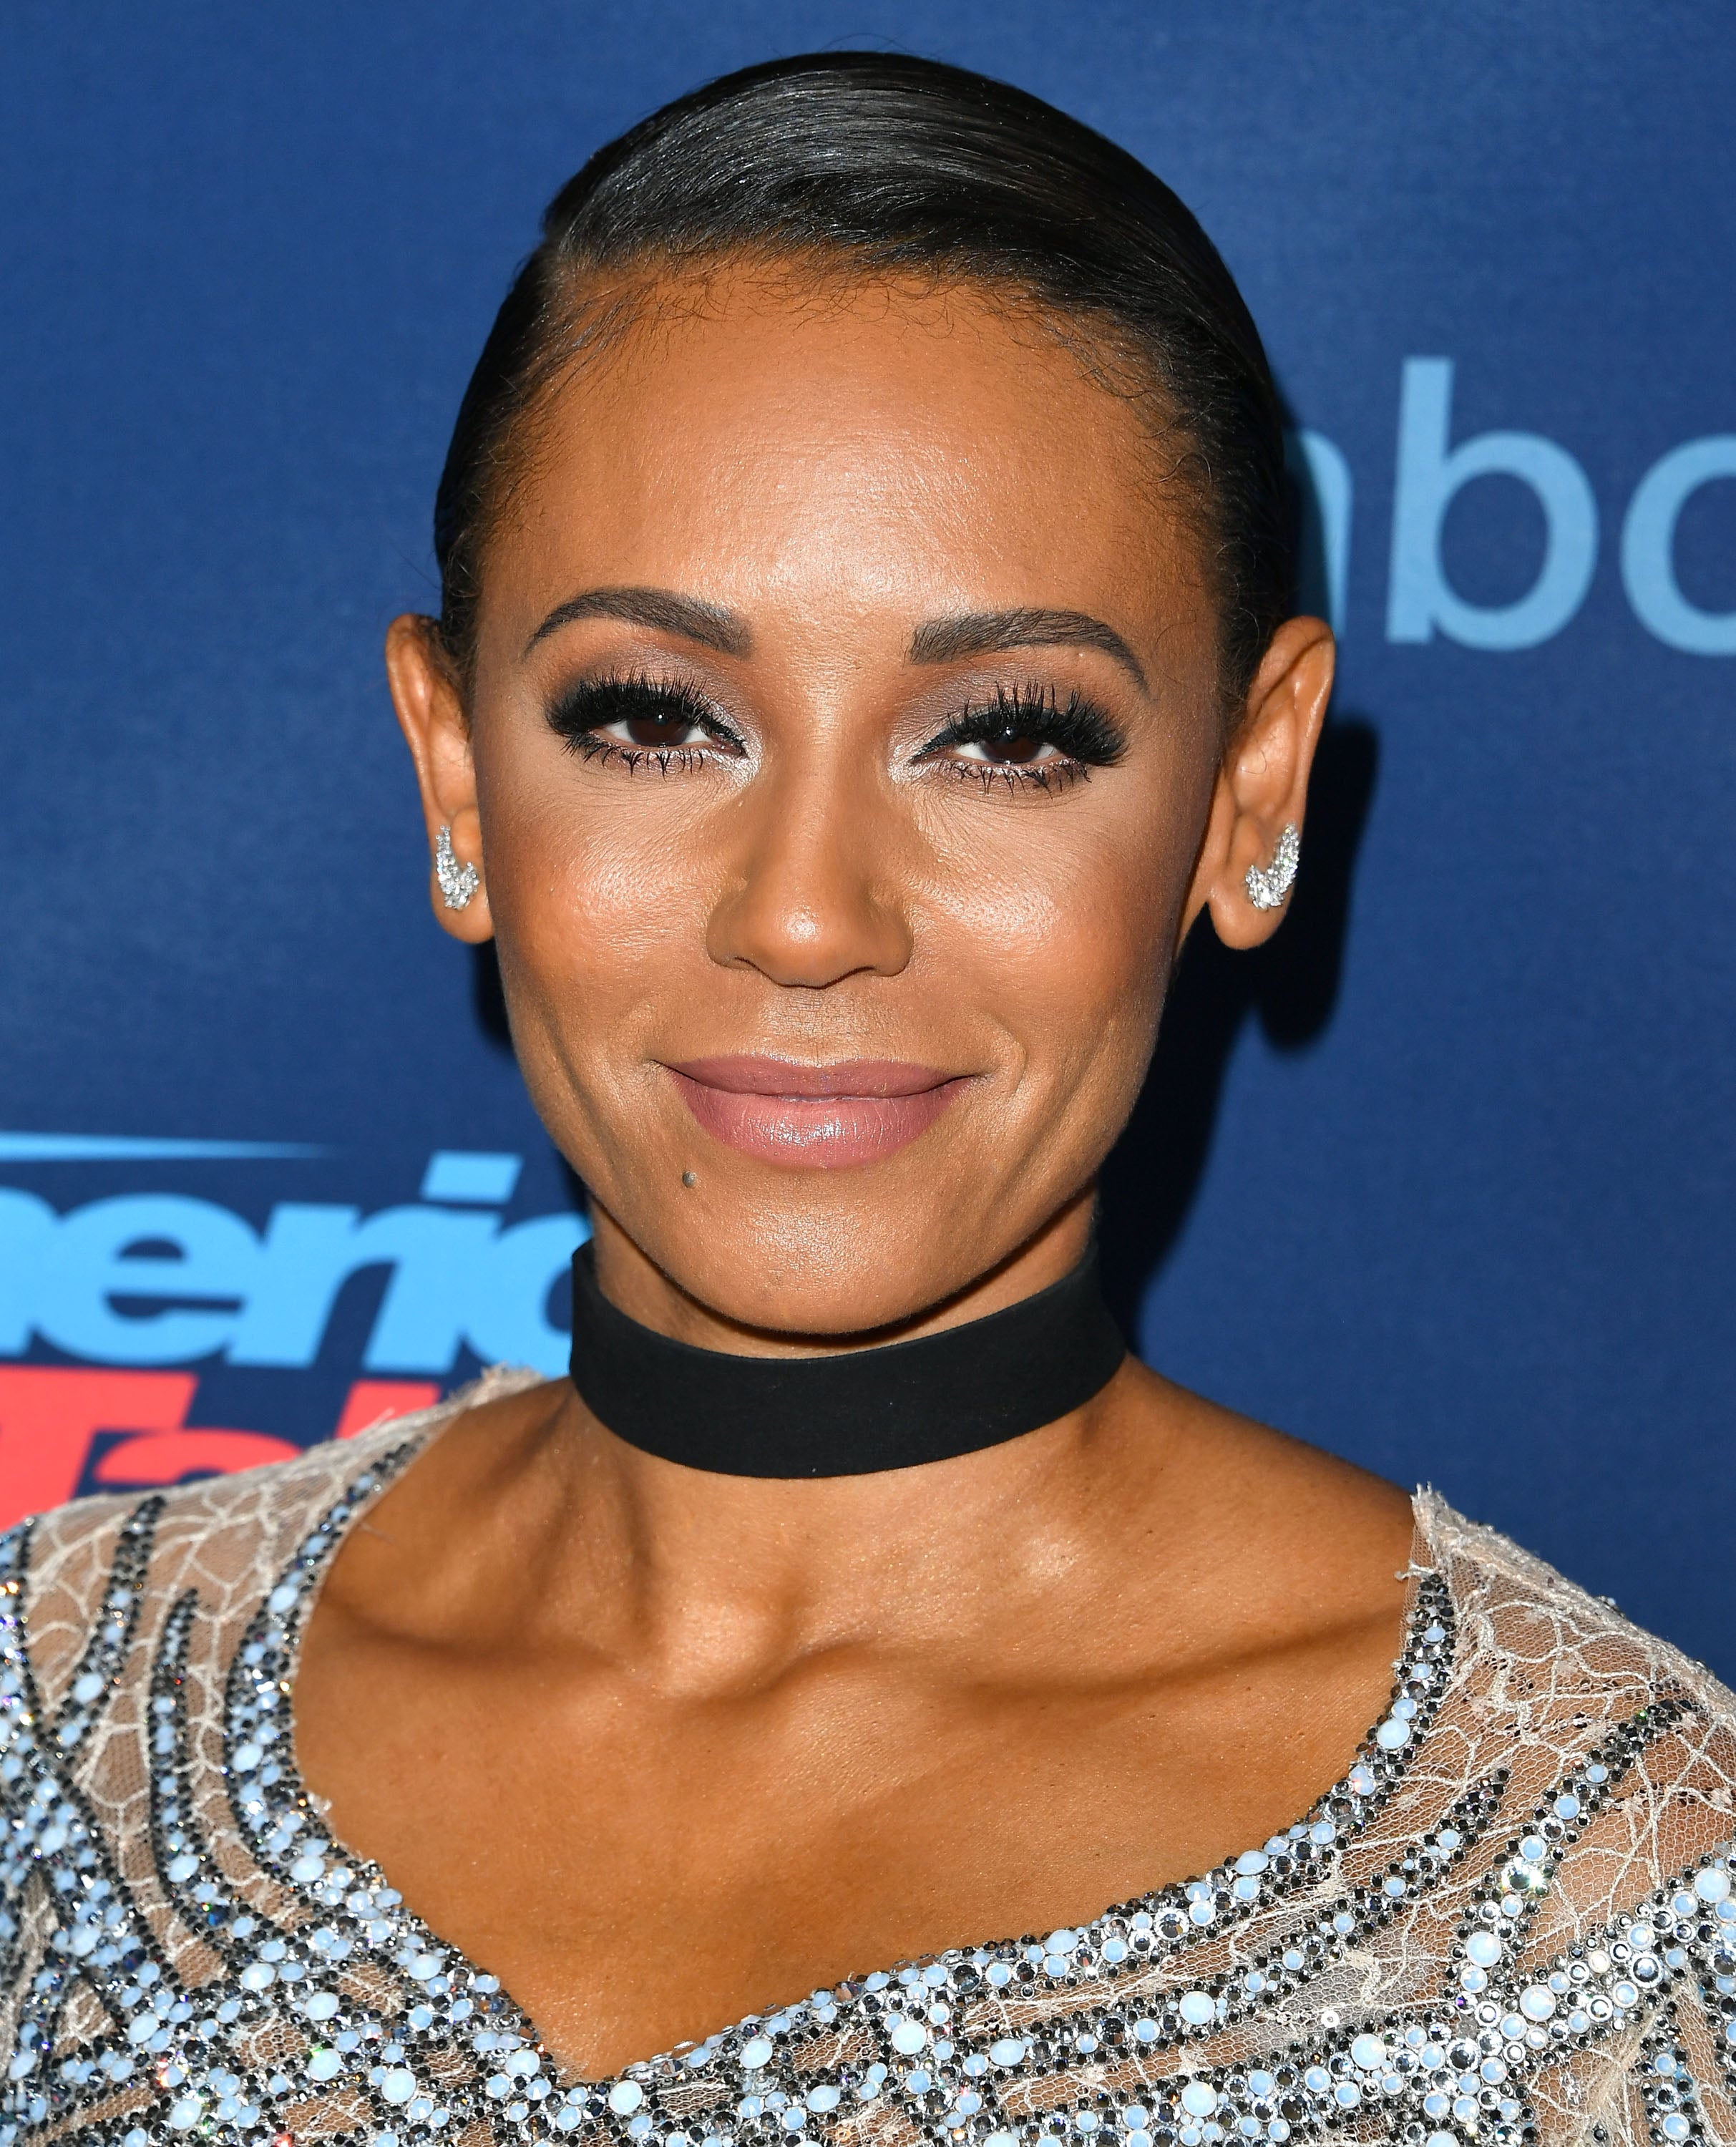 Melanie Brown Adds Spice To Broadway With New Role In 'Chicago'
